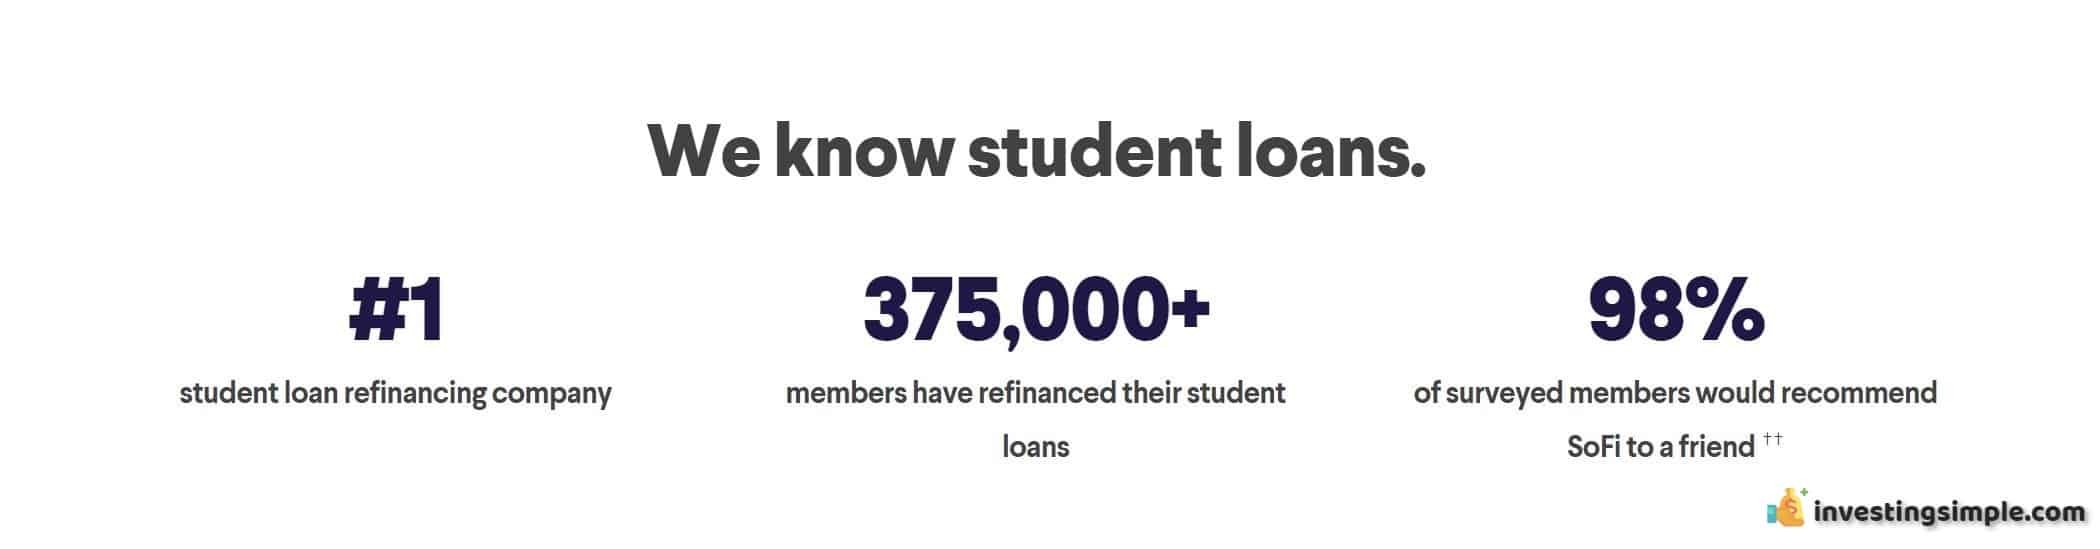 SoFi Student Loan Review 2021 Is It Any Good?